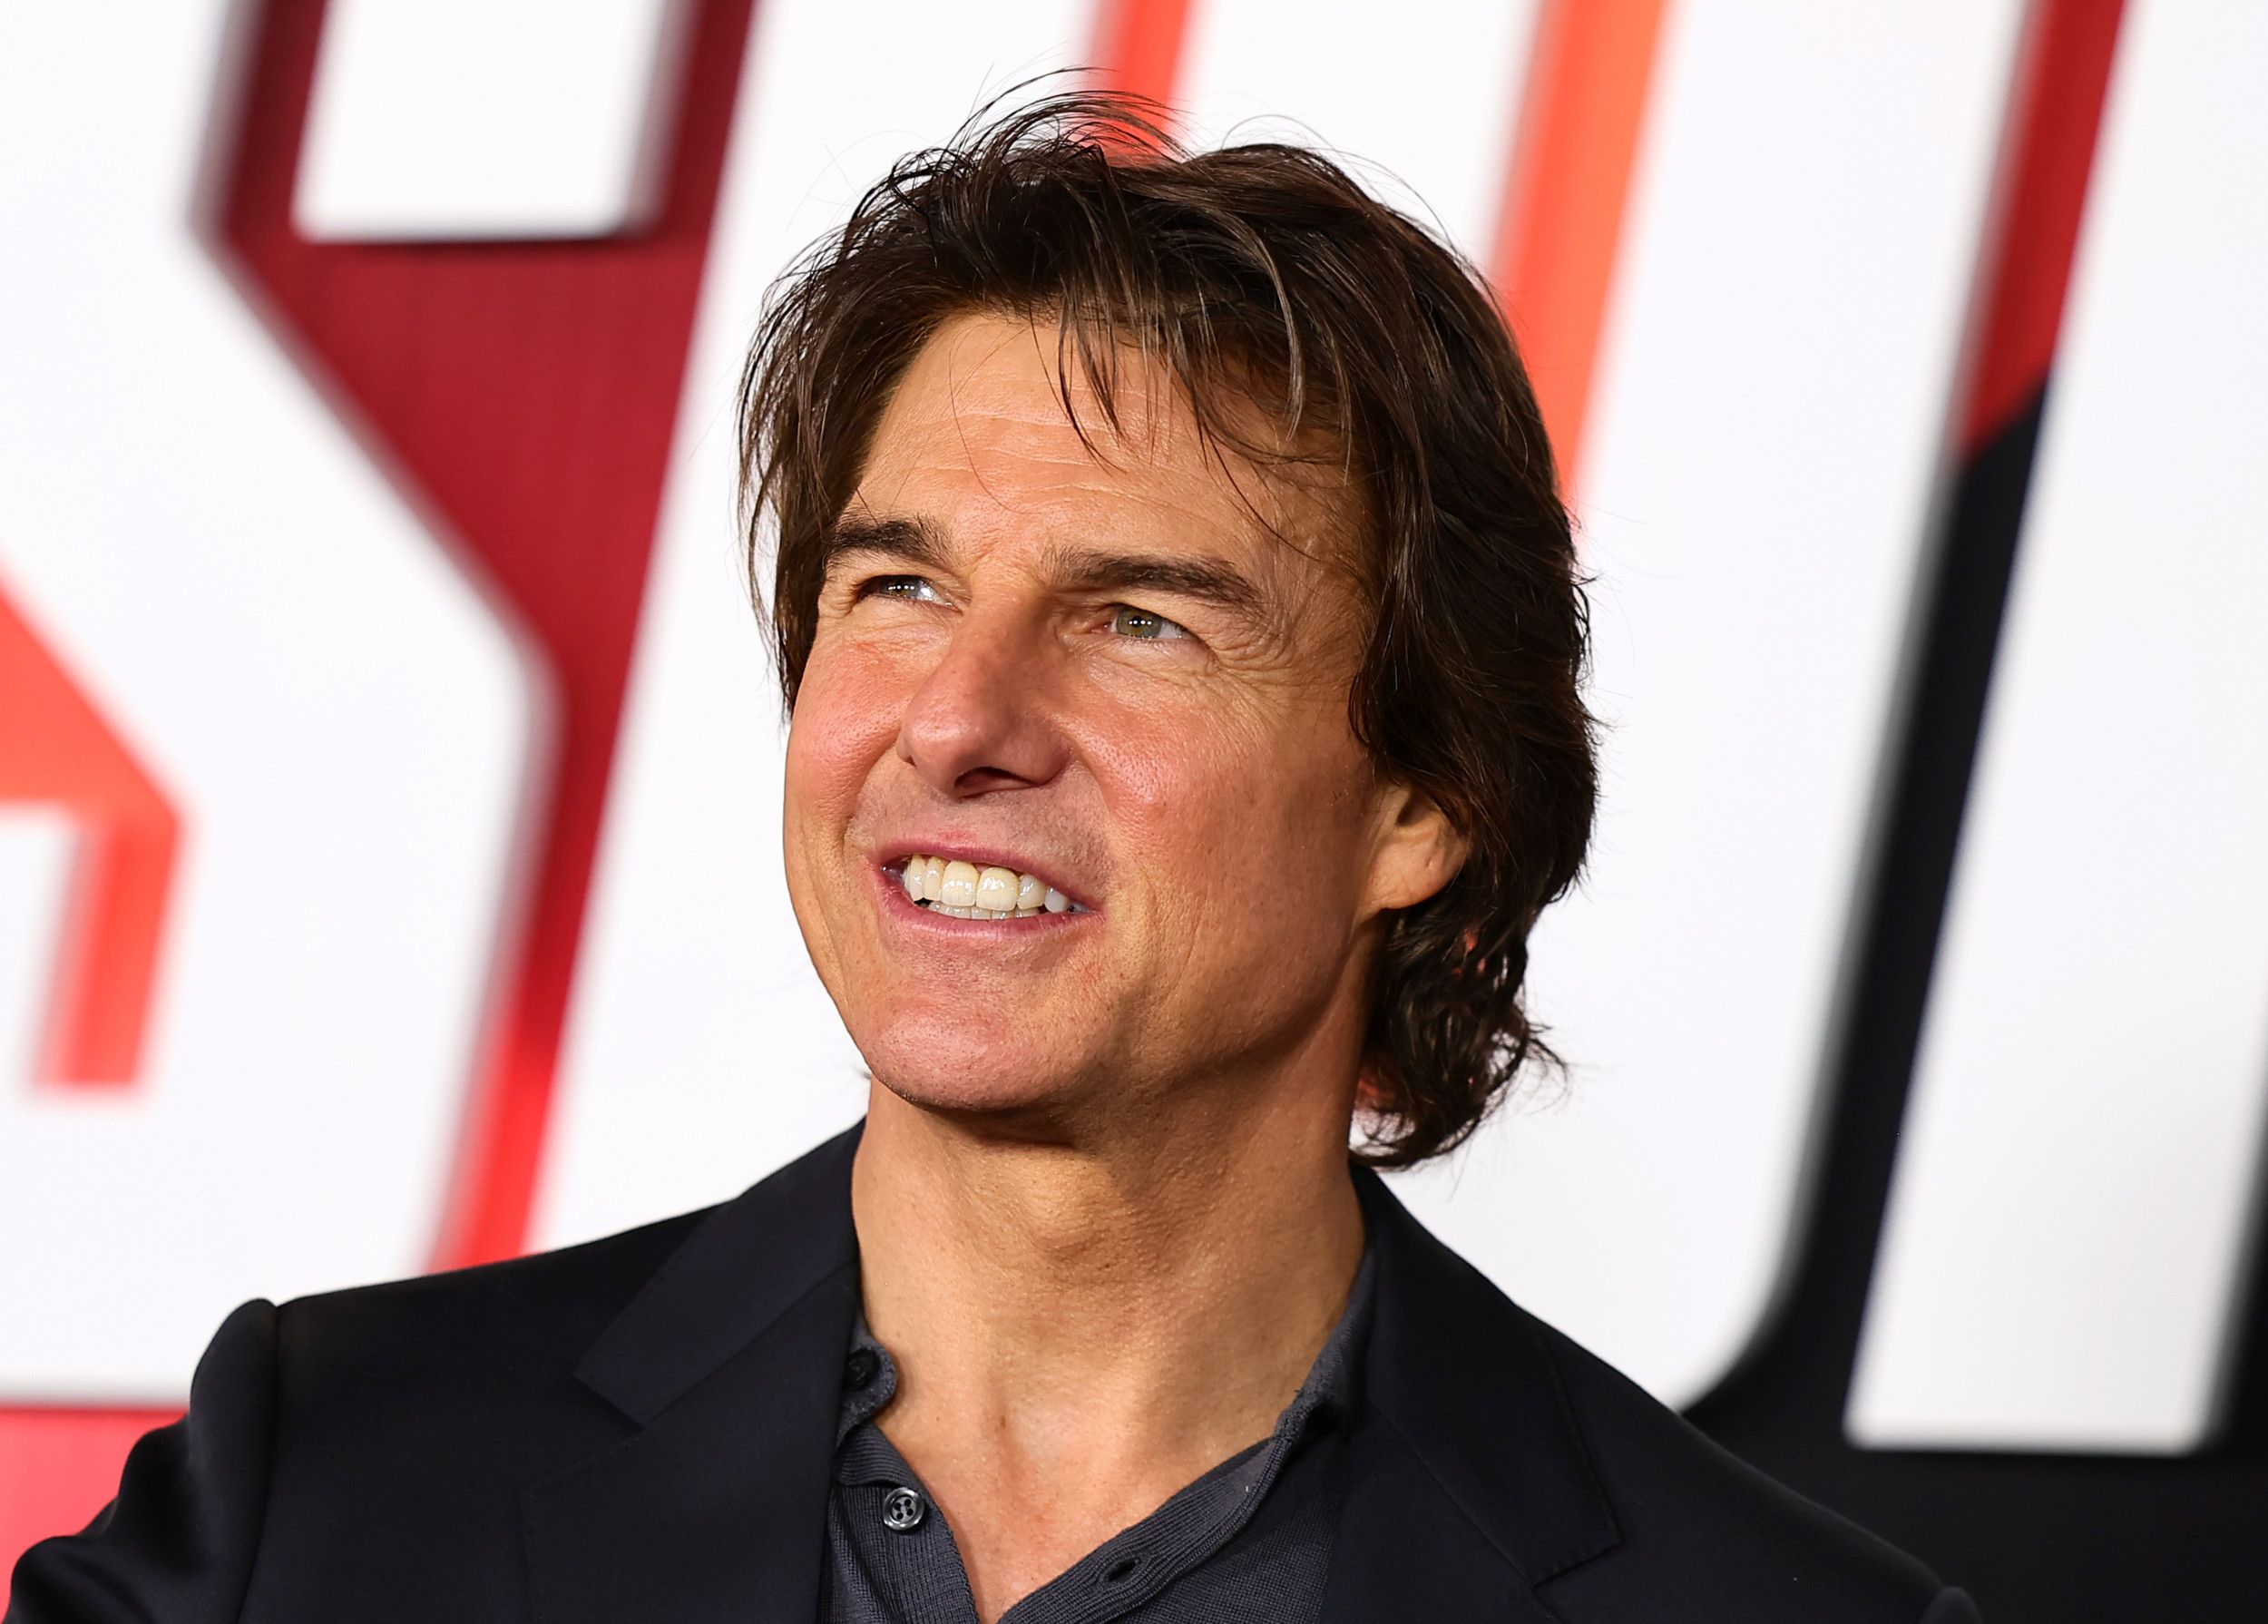 Tom Cruise steps out in London in rare appearance with son Connor